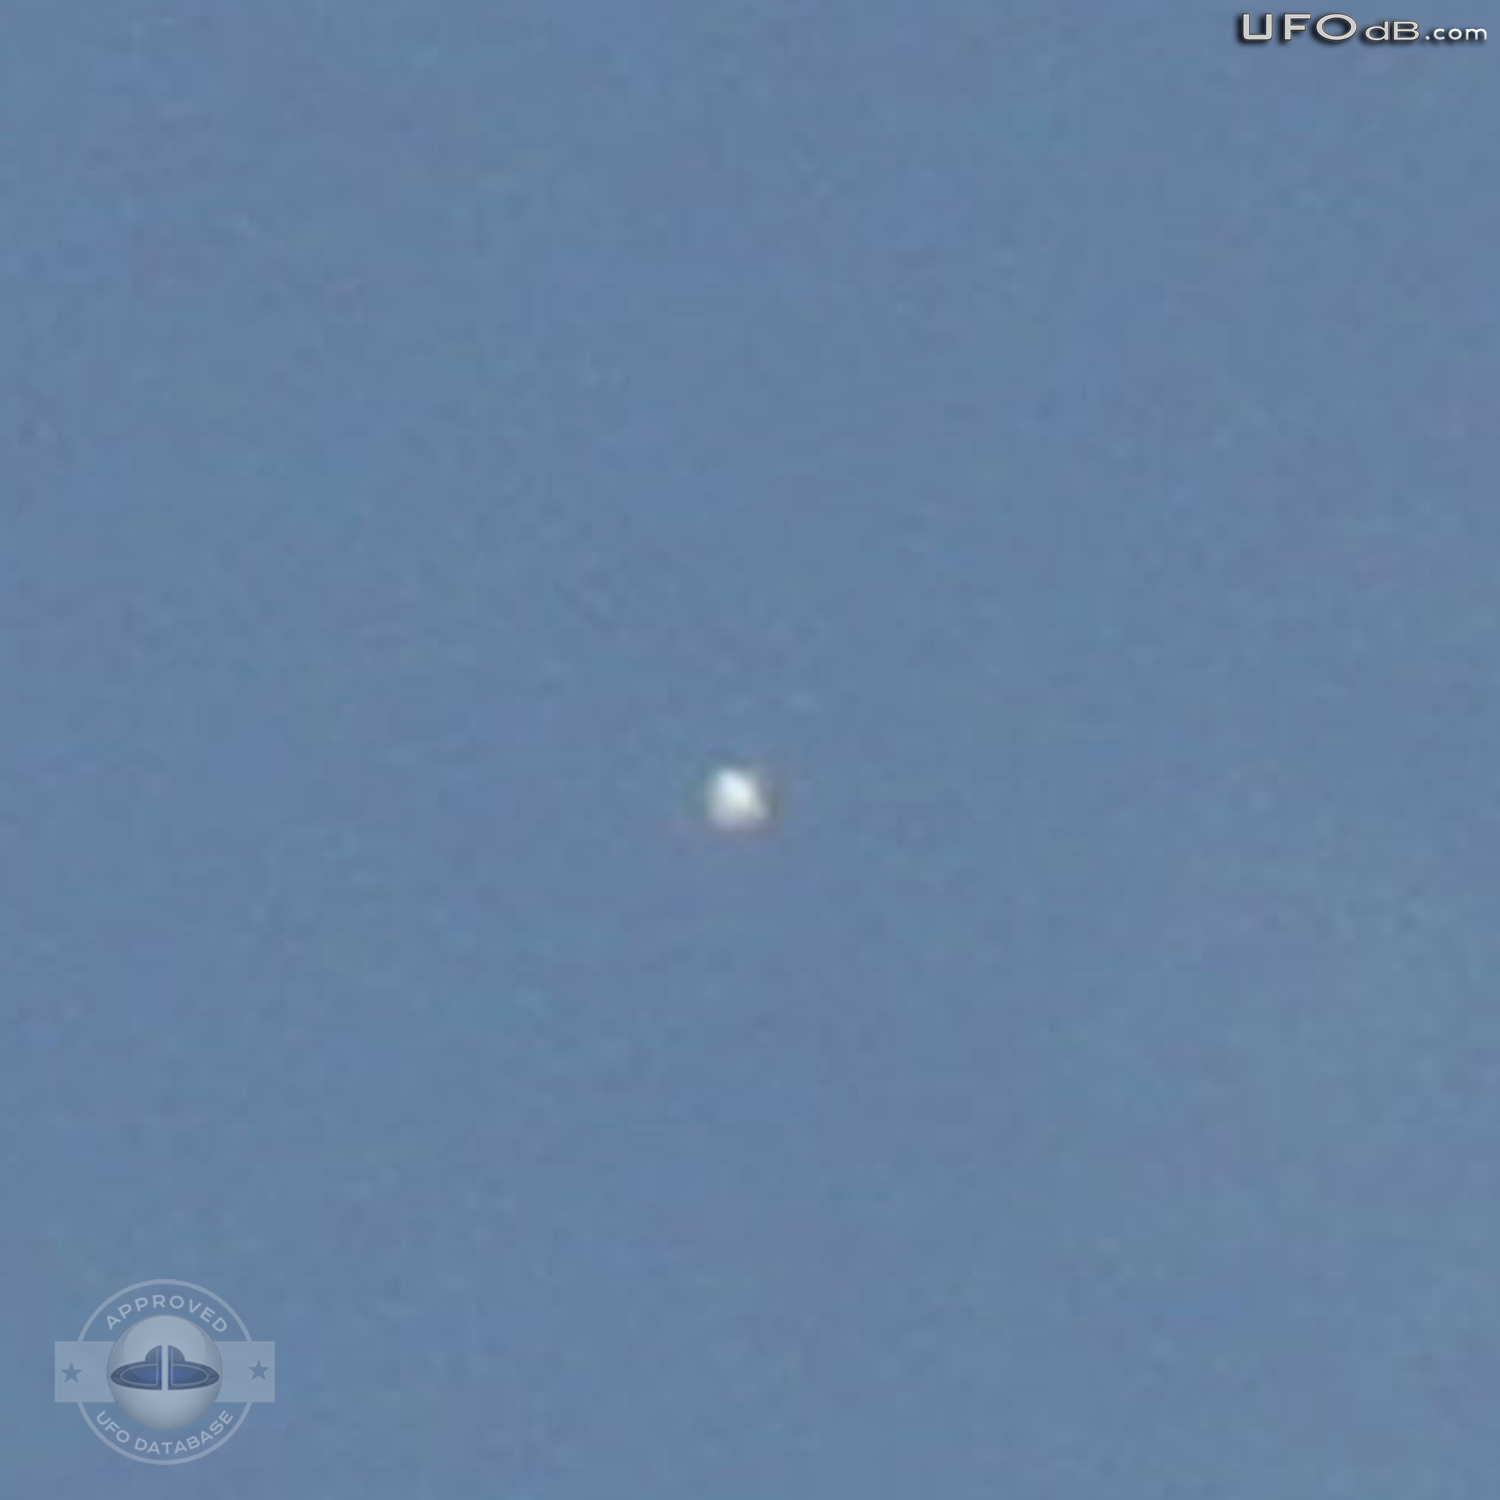 Couple on their balcony in Vienna sees a UFO and gets a picture - 2011 UFO Picture #367-2